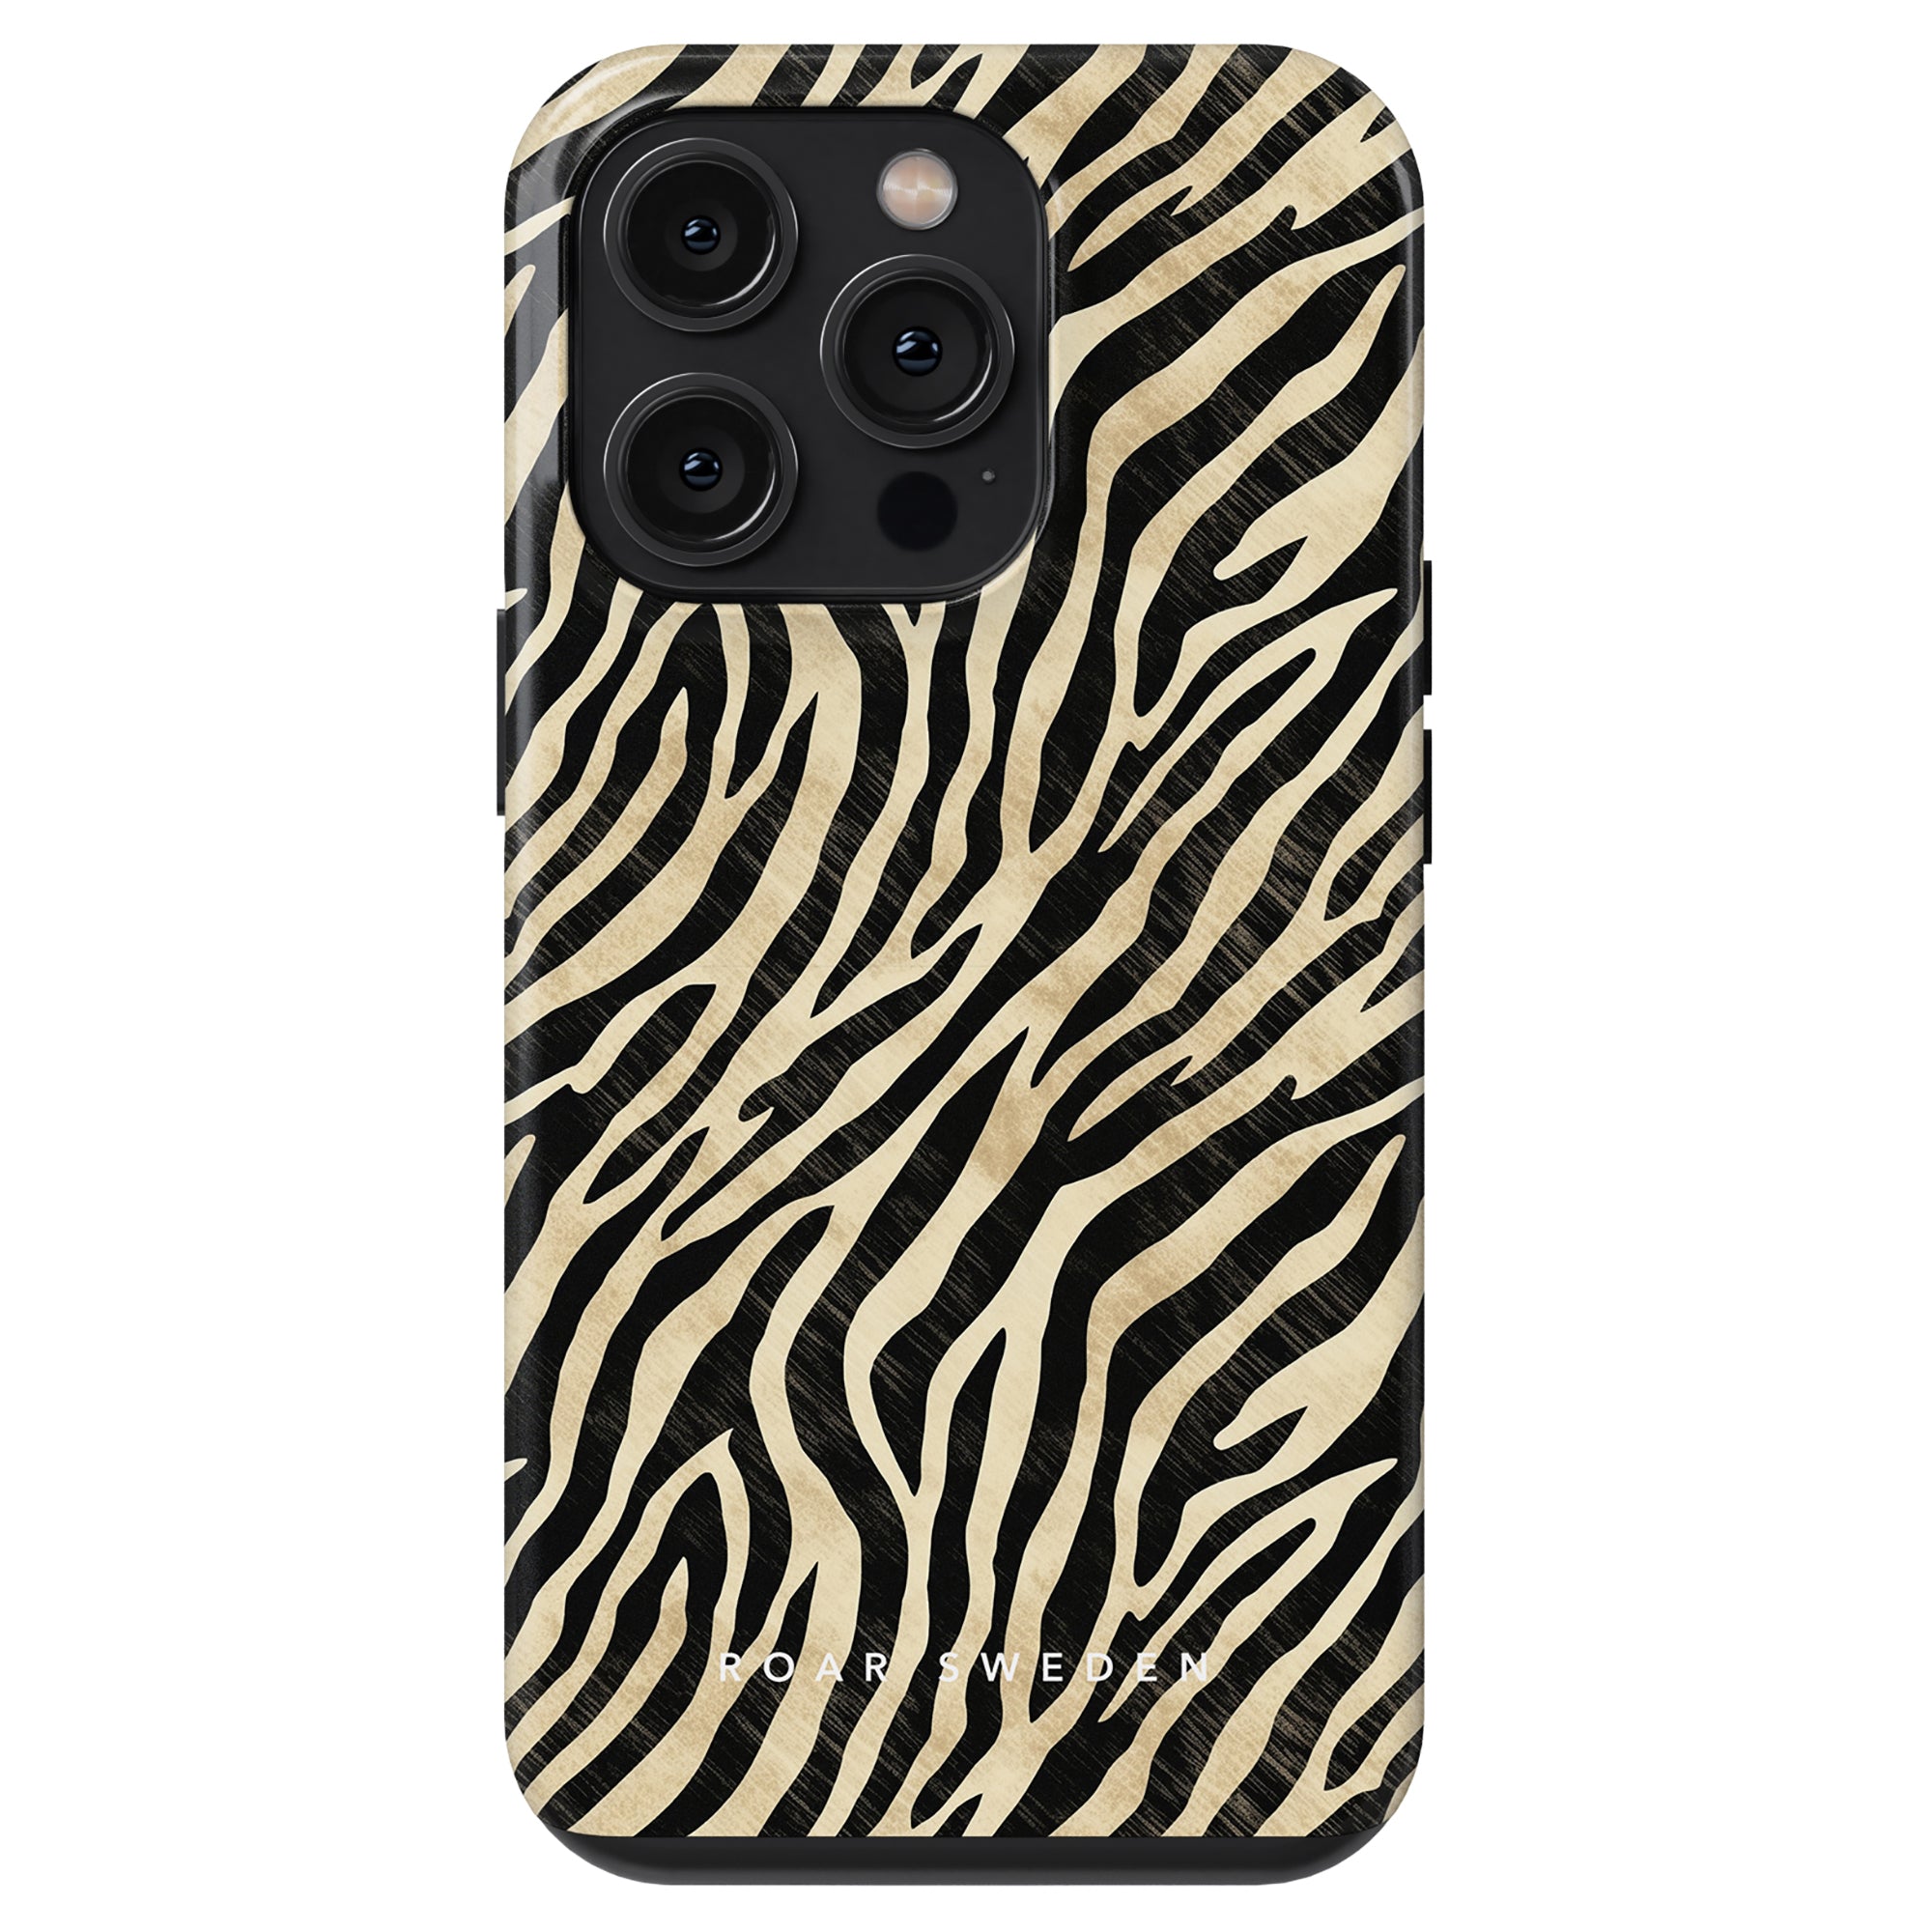 Introducing the Smartphone with a black and beige zebra print case from our Zebra Collection, featuring robust skydd and three camera lenses on the back. This Marty - Tough Case ensures style and durability in one elegant package.